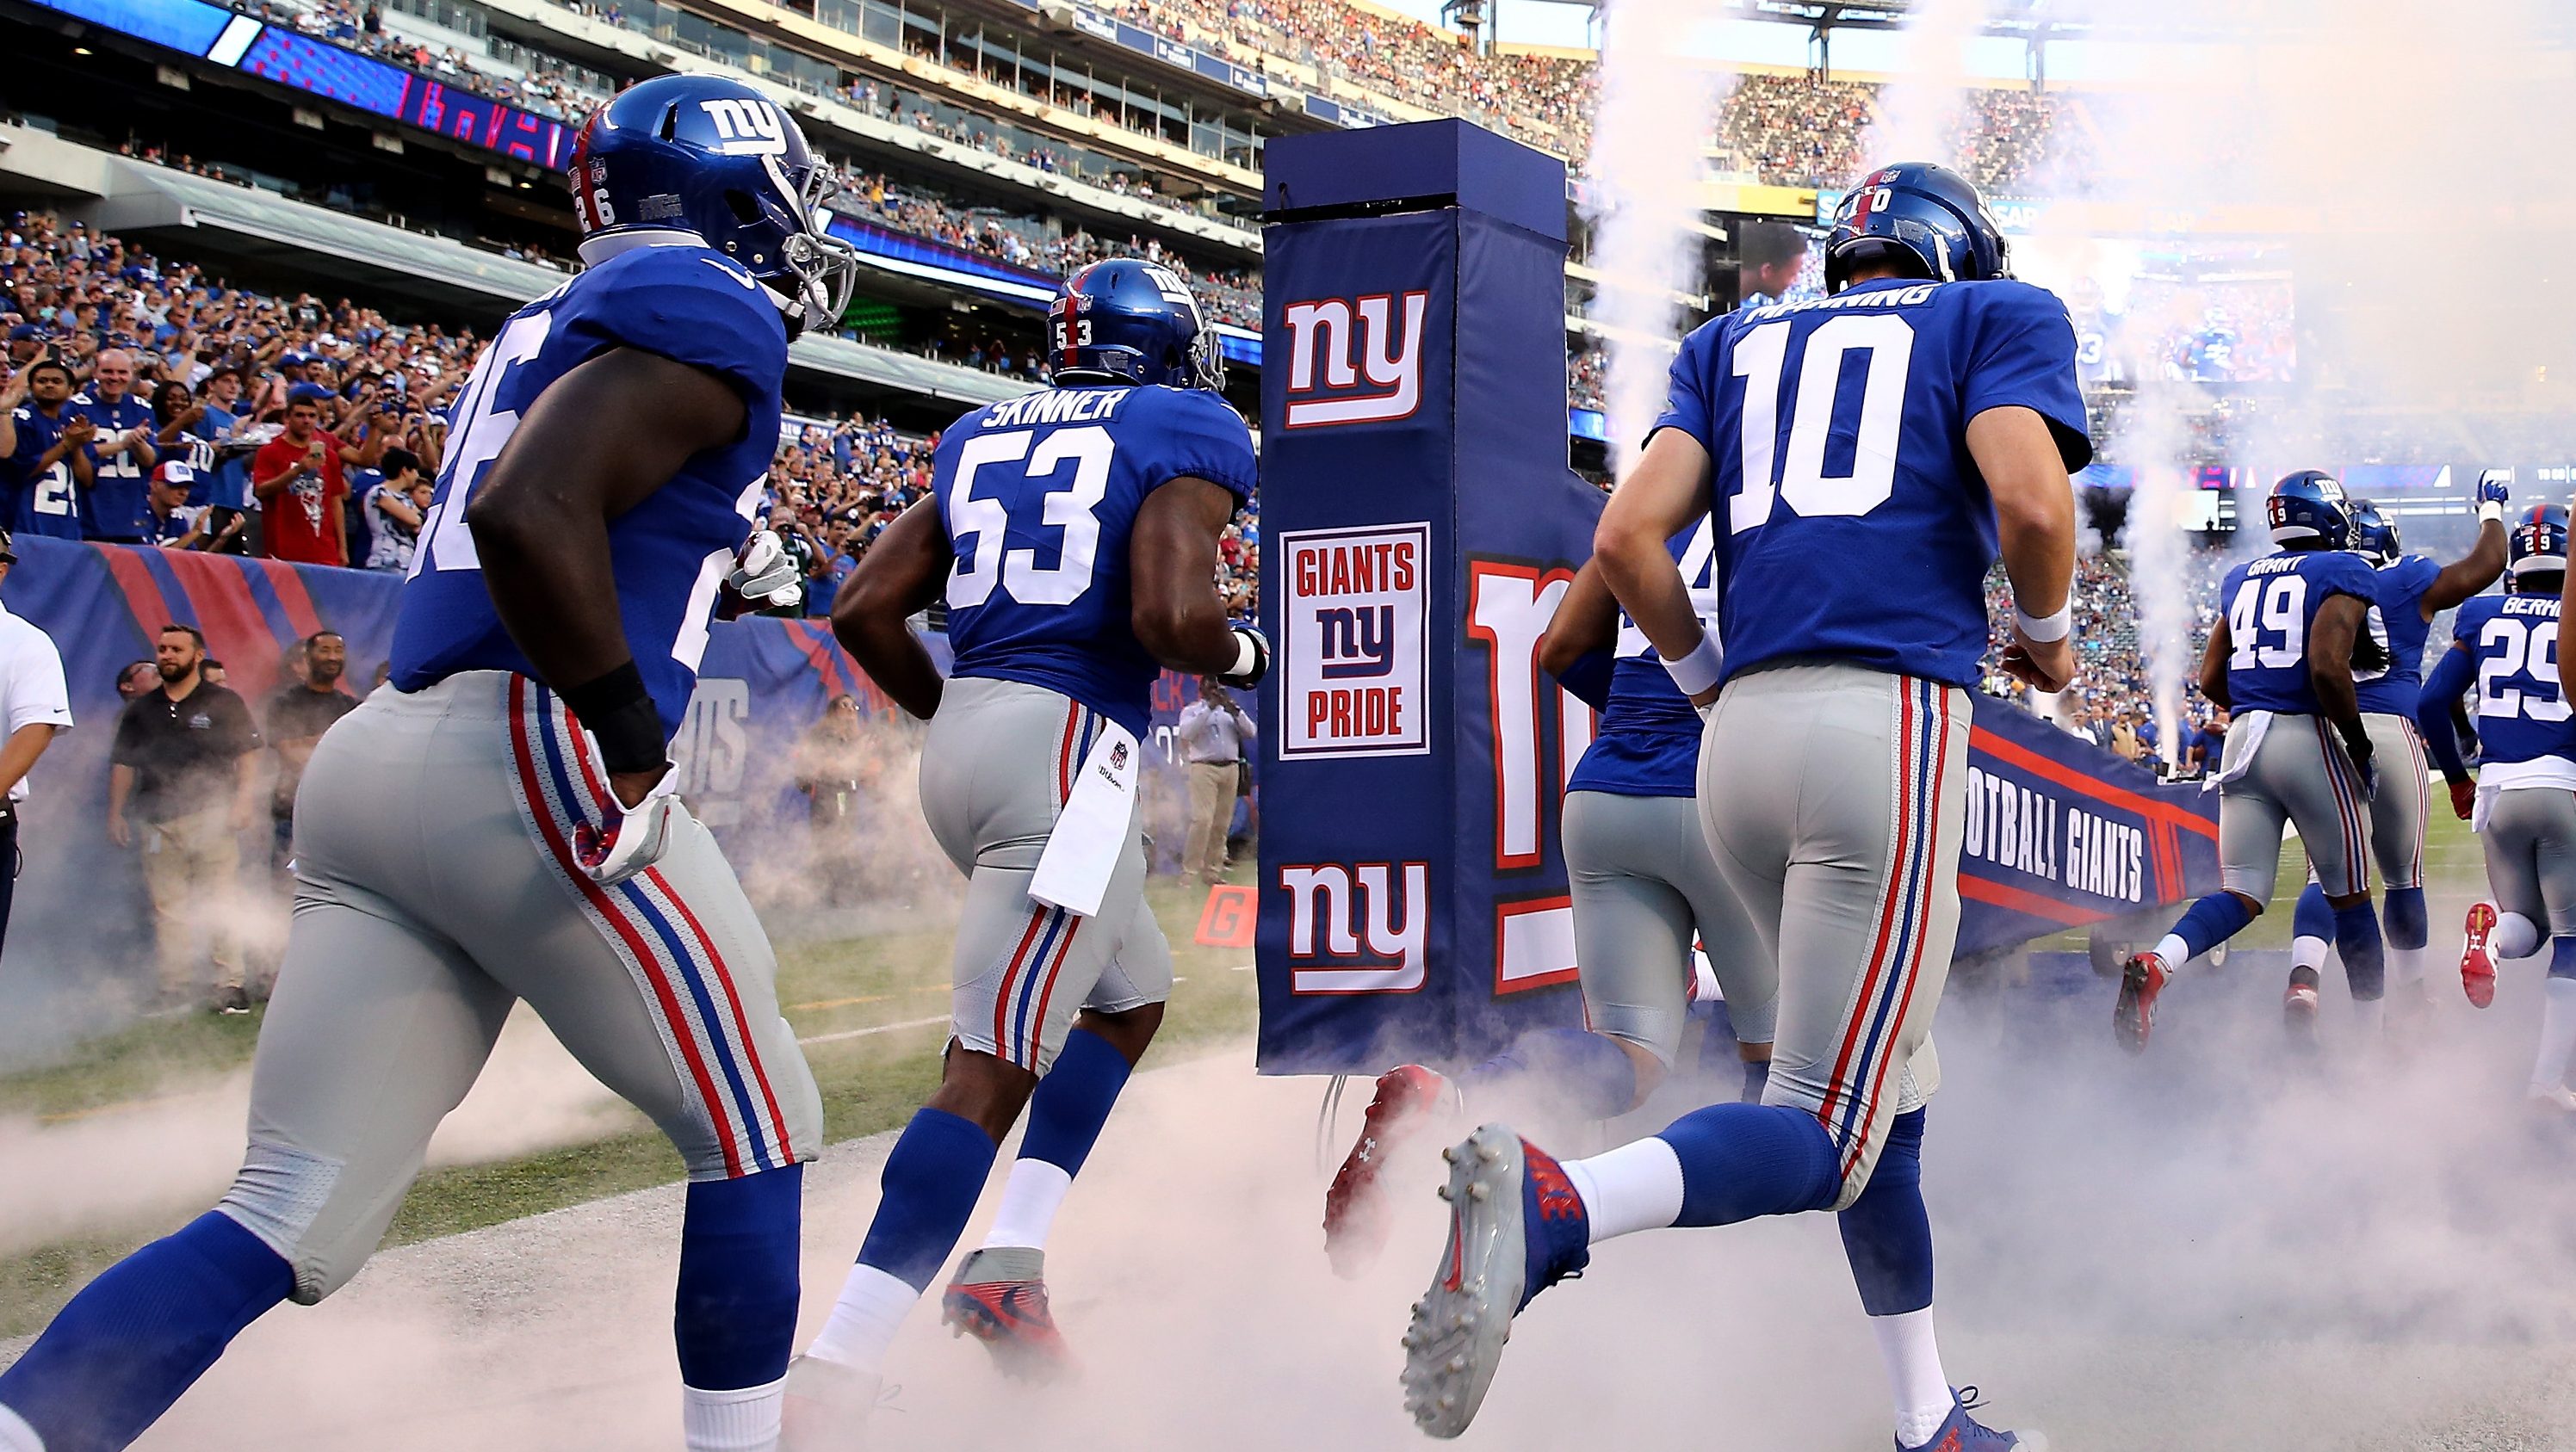 How to Watch Giants Football Games Online Without Cable